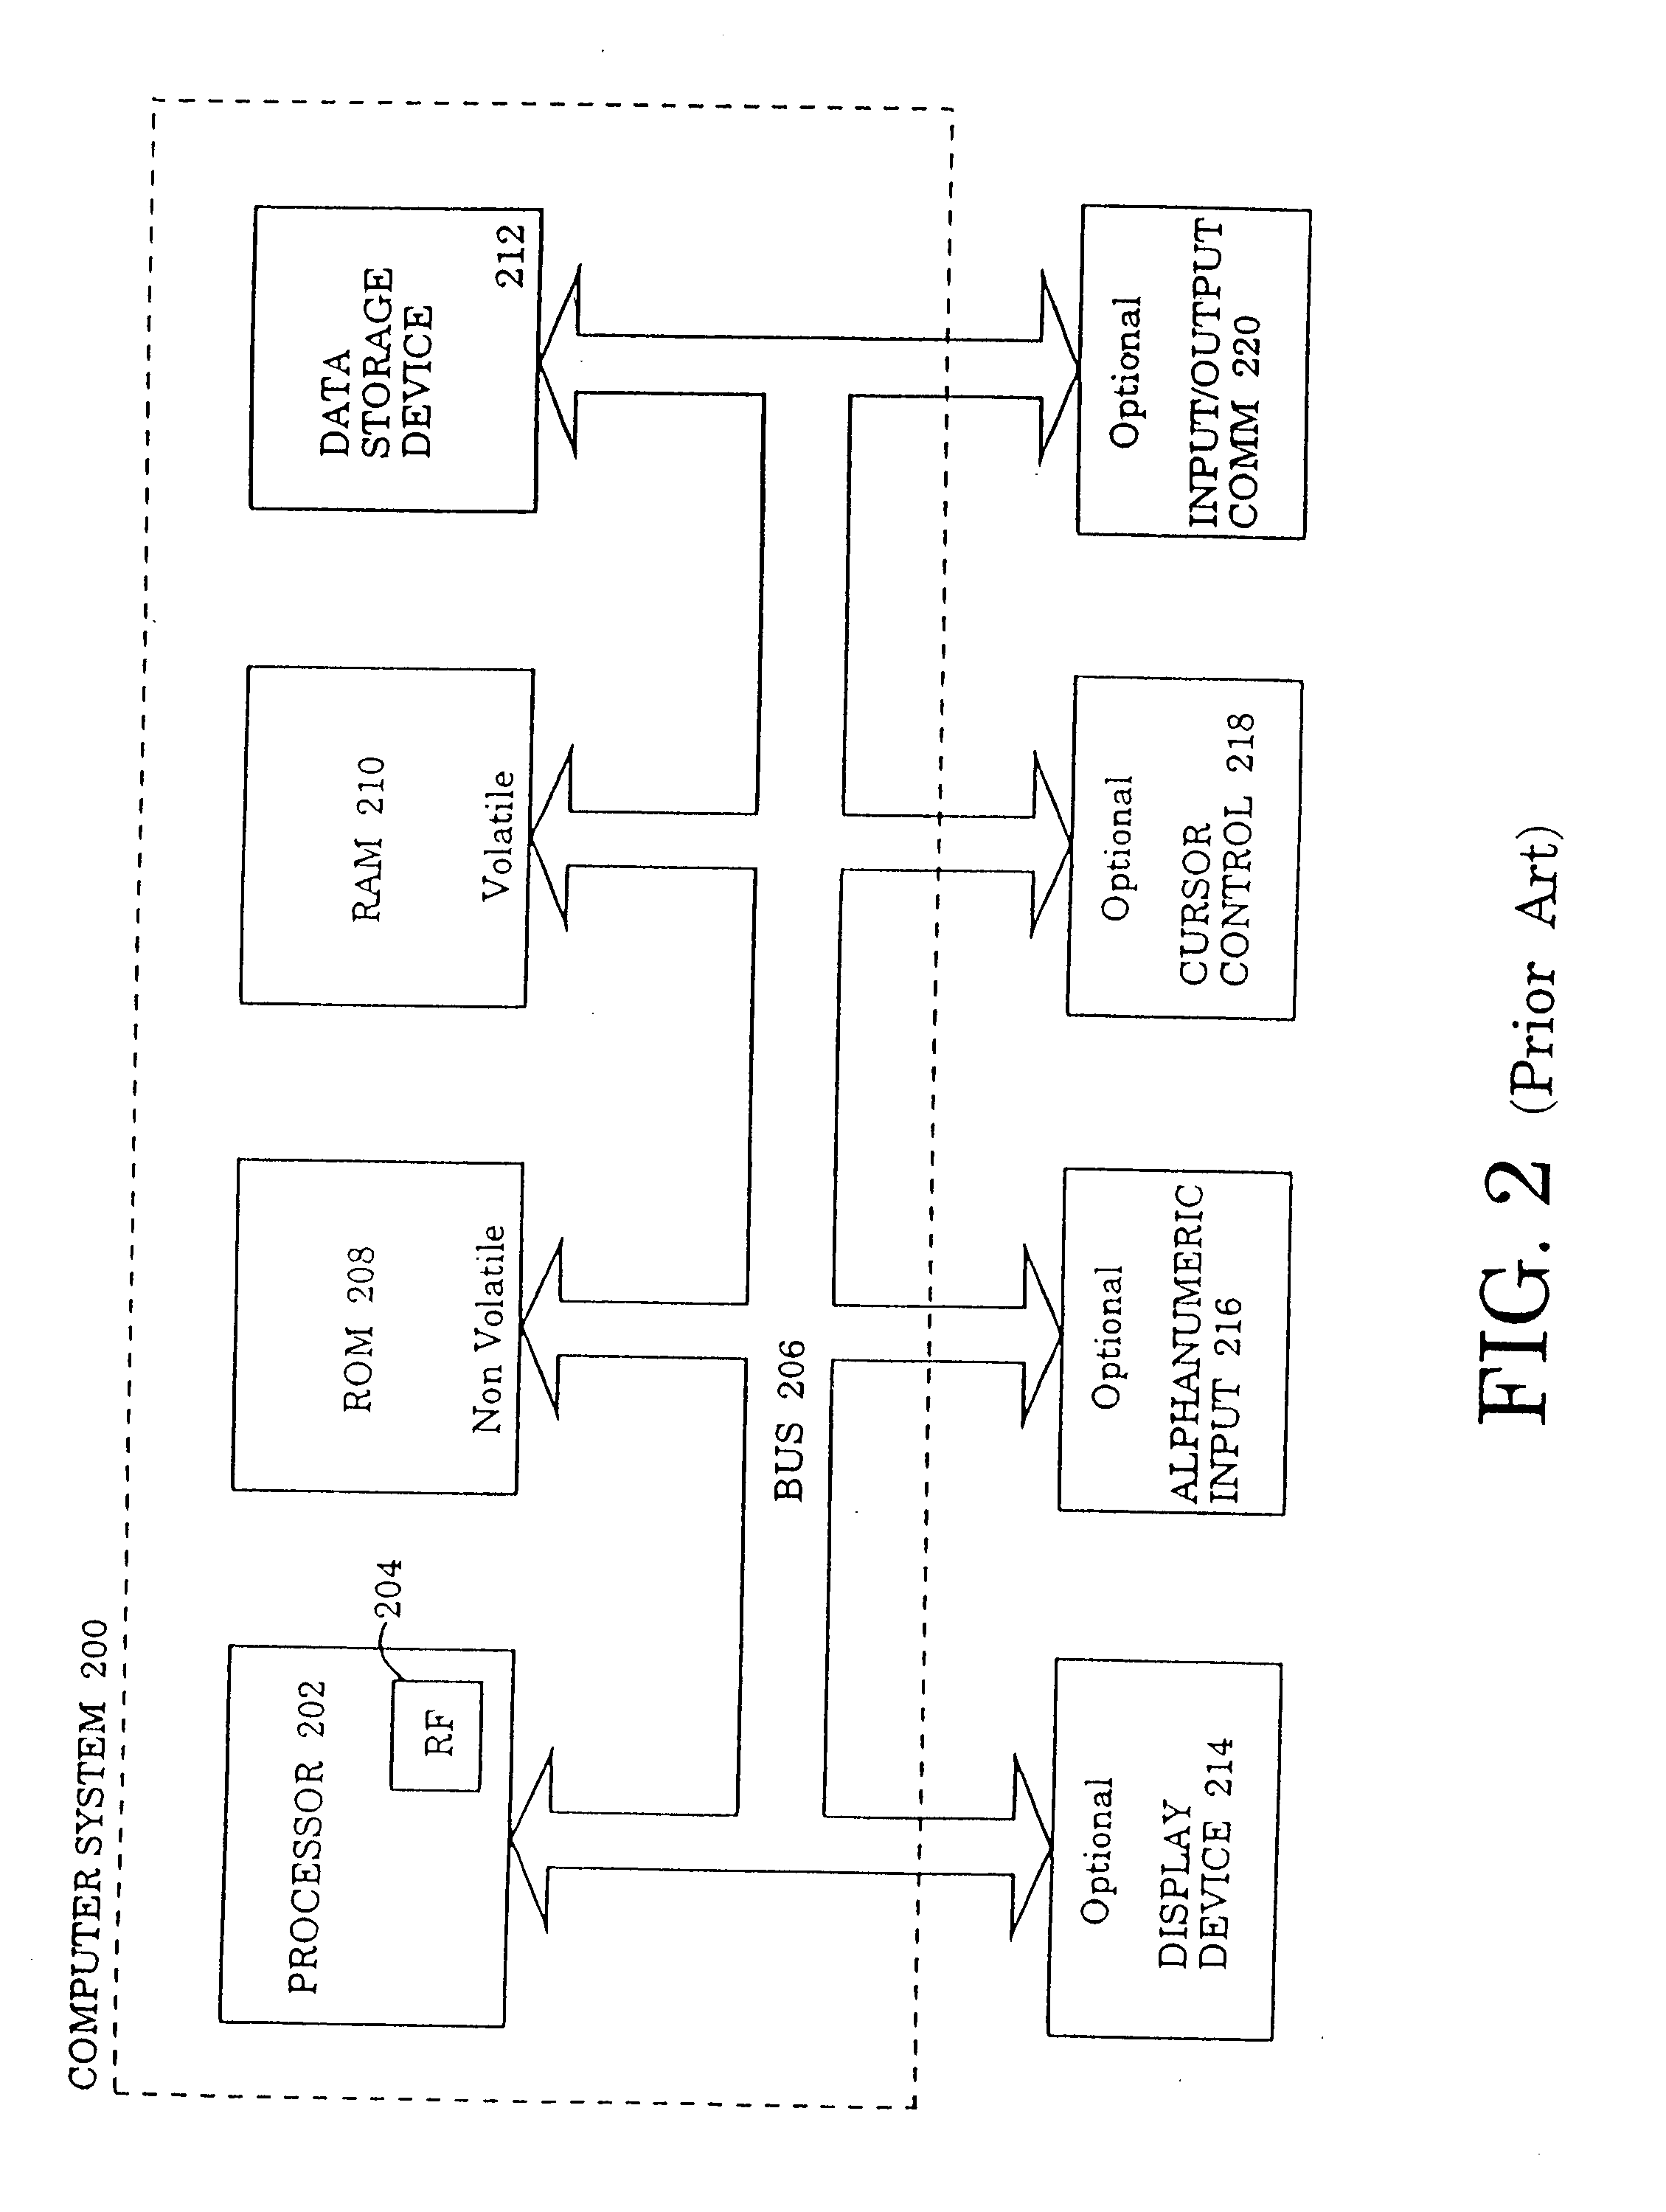 Alignment and ordering of vector elements for single instruction multiple data processing